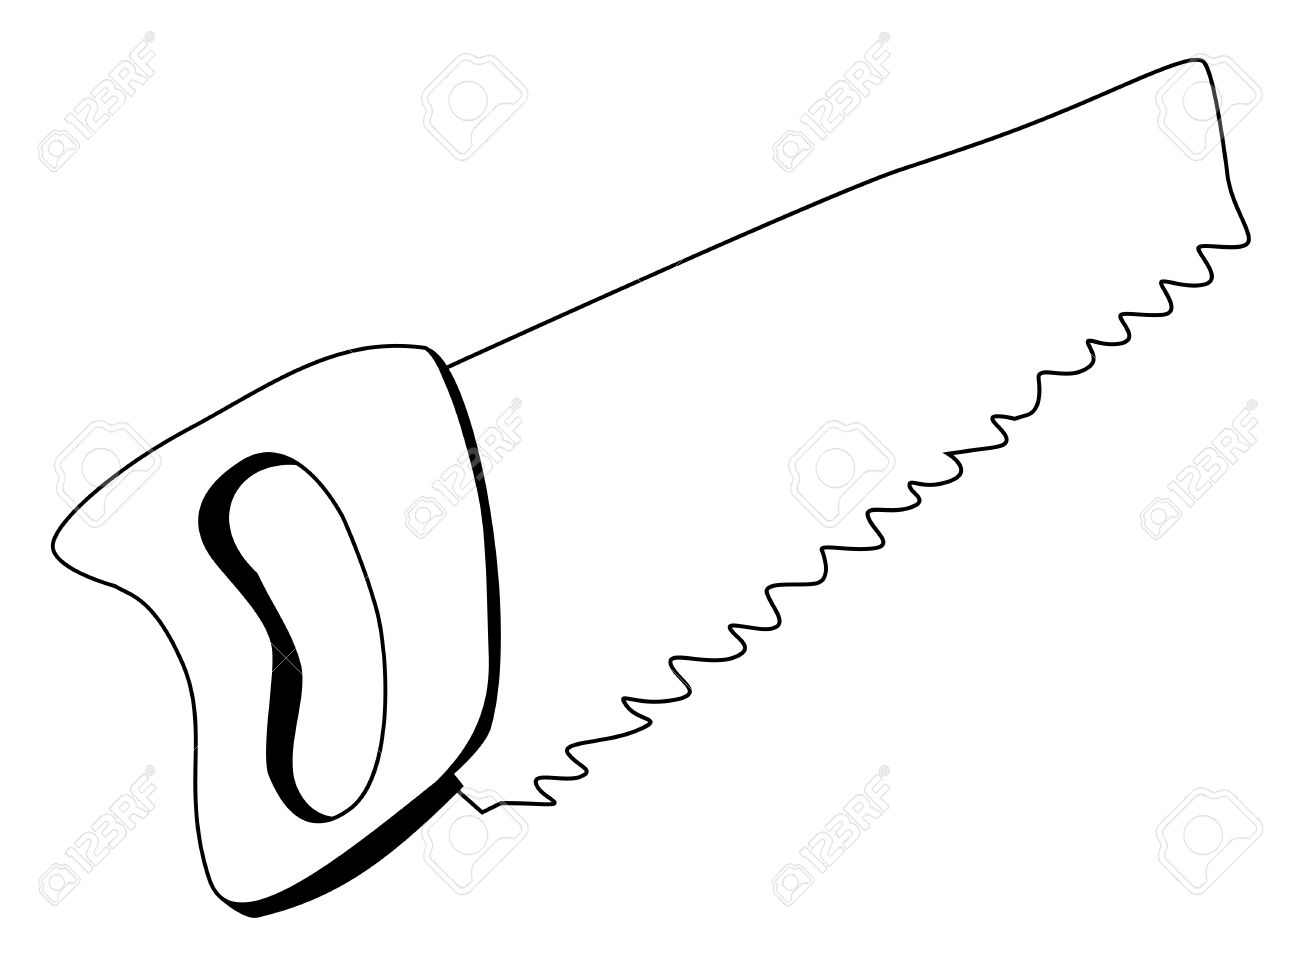 outline illustration of hand saw Stock Vector - 45587908